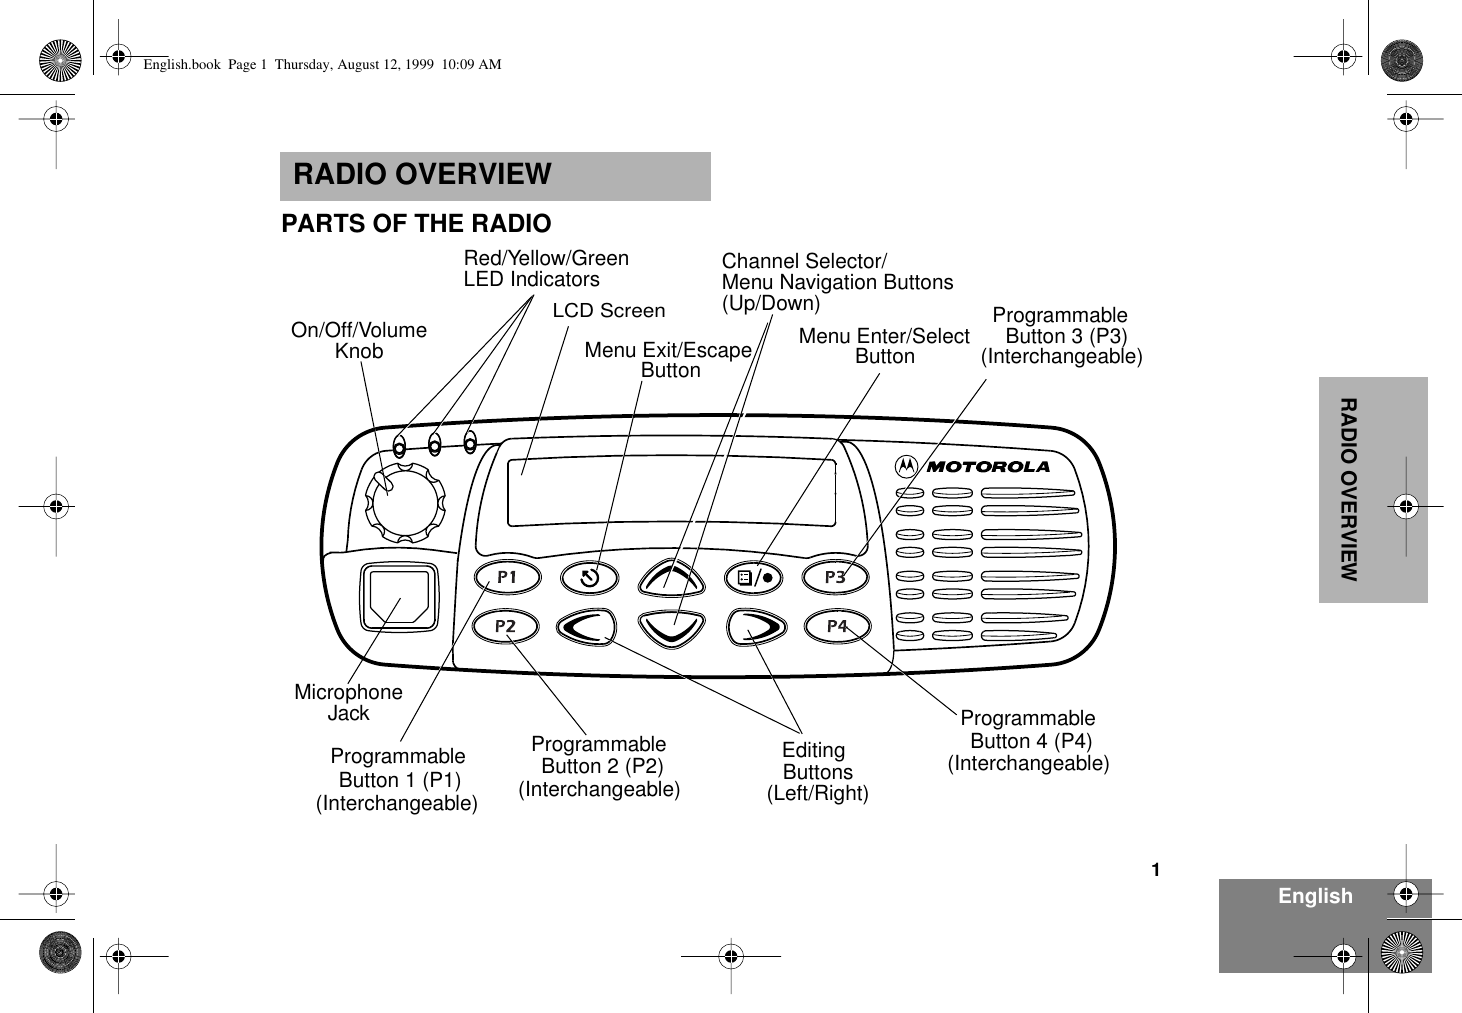  1 EnglishRADIO OVERVIEW RADIO OVERVIEW PARTS OF THE RADIOEditingButtonsMenu Enter/SelectButton(Interchangeable)ProgrammableButton 2 (P2) (Interchangeable)ProgrammableButton 4 (P4)(Interchangeable)ProgrammableButton 3 (P3)LCD ScreenRed/Yellow/GreenLED IndicatorsMenu Exit/EscapeButton(Interchangeable)ProgrammableButton 1 (P1) (Left/Right)MicrophoneJackKnobOn/Off/VolumeChannel Selector/Menu Navigation Buttons(Up/Down) English.book  Page 1  Thursday, August 12, 1999  10:09 AM